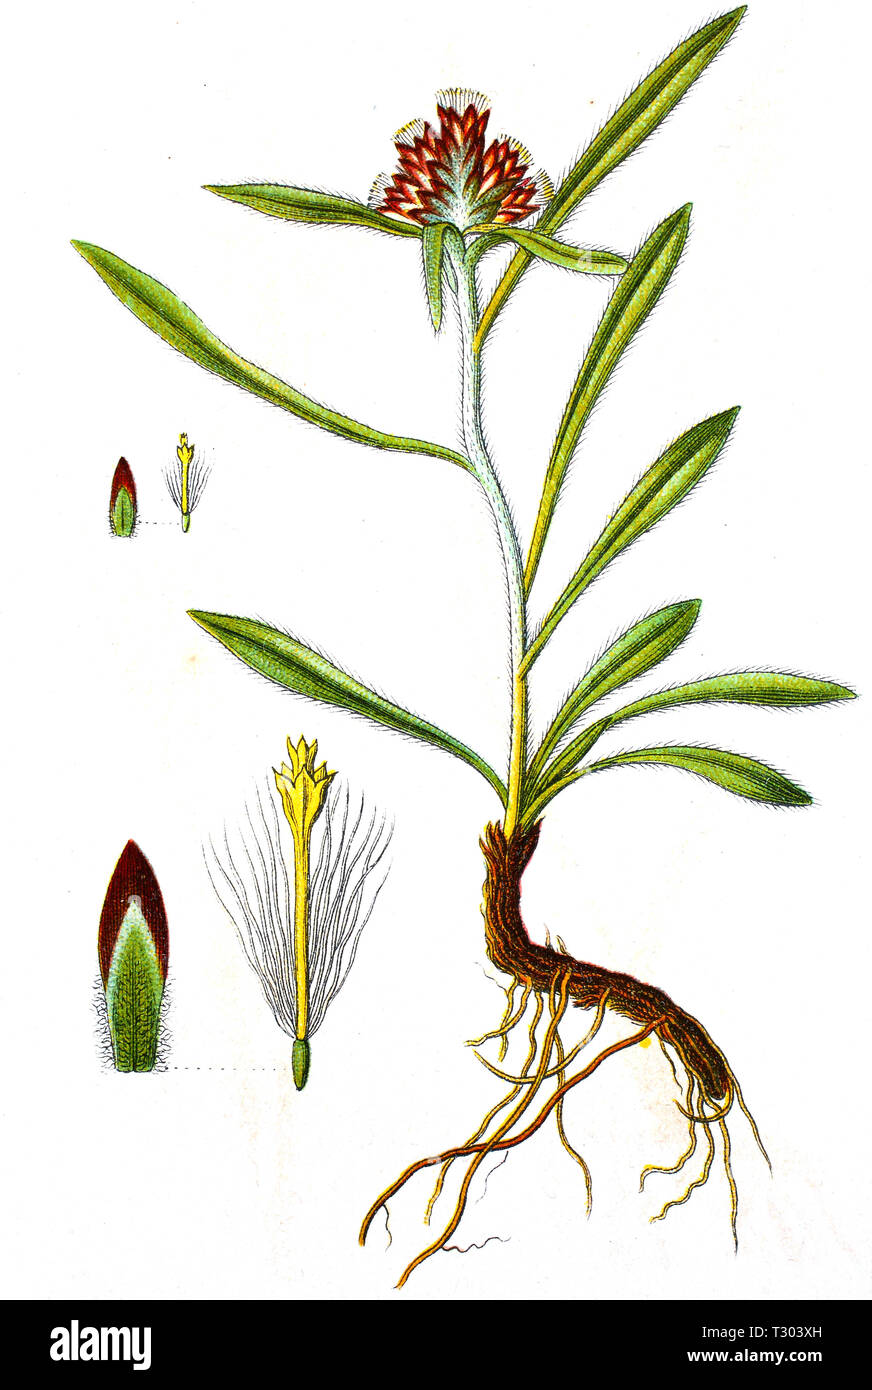 Digital improved reproduction of an illustration of, Zwerg-Ruhrkraut, Gnaphalium supinum, from an original print of the 19th century Stock Photo